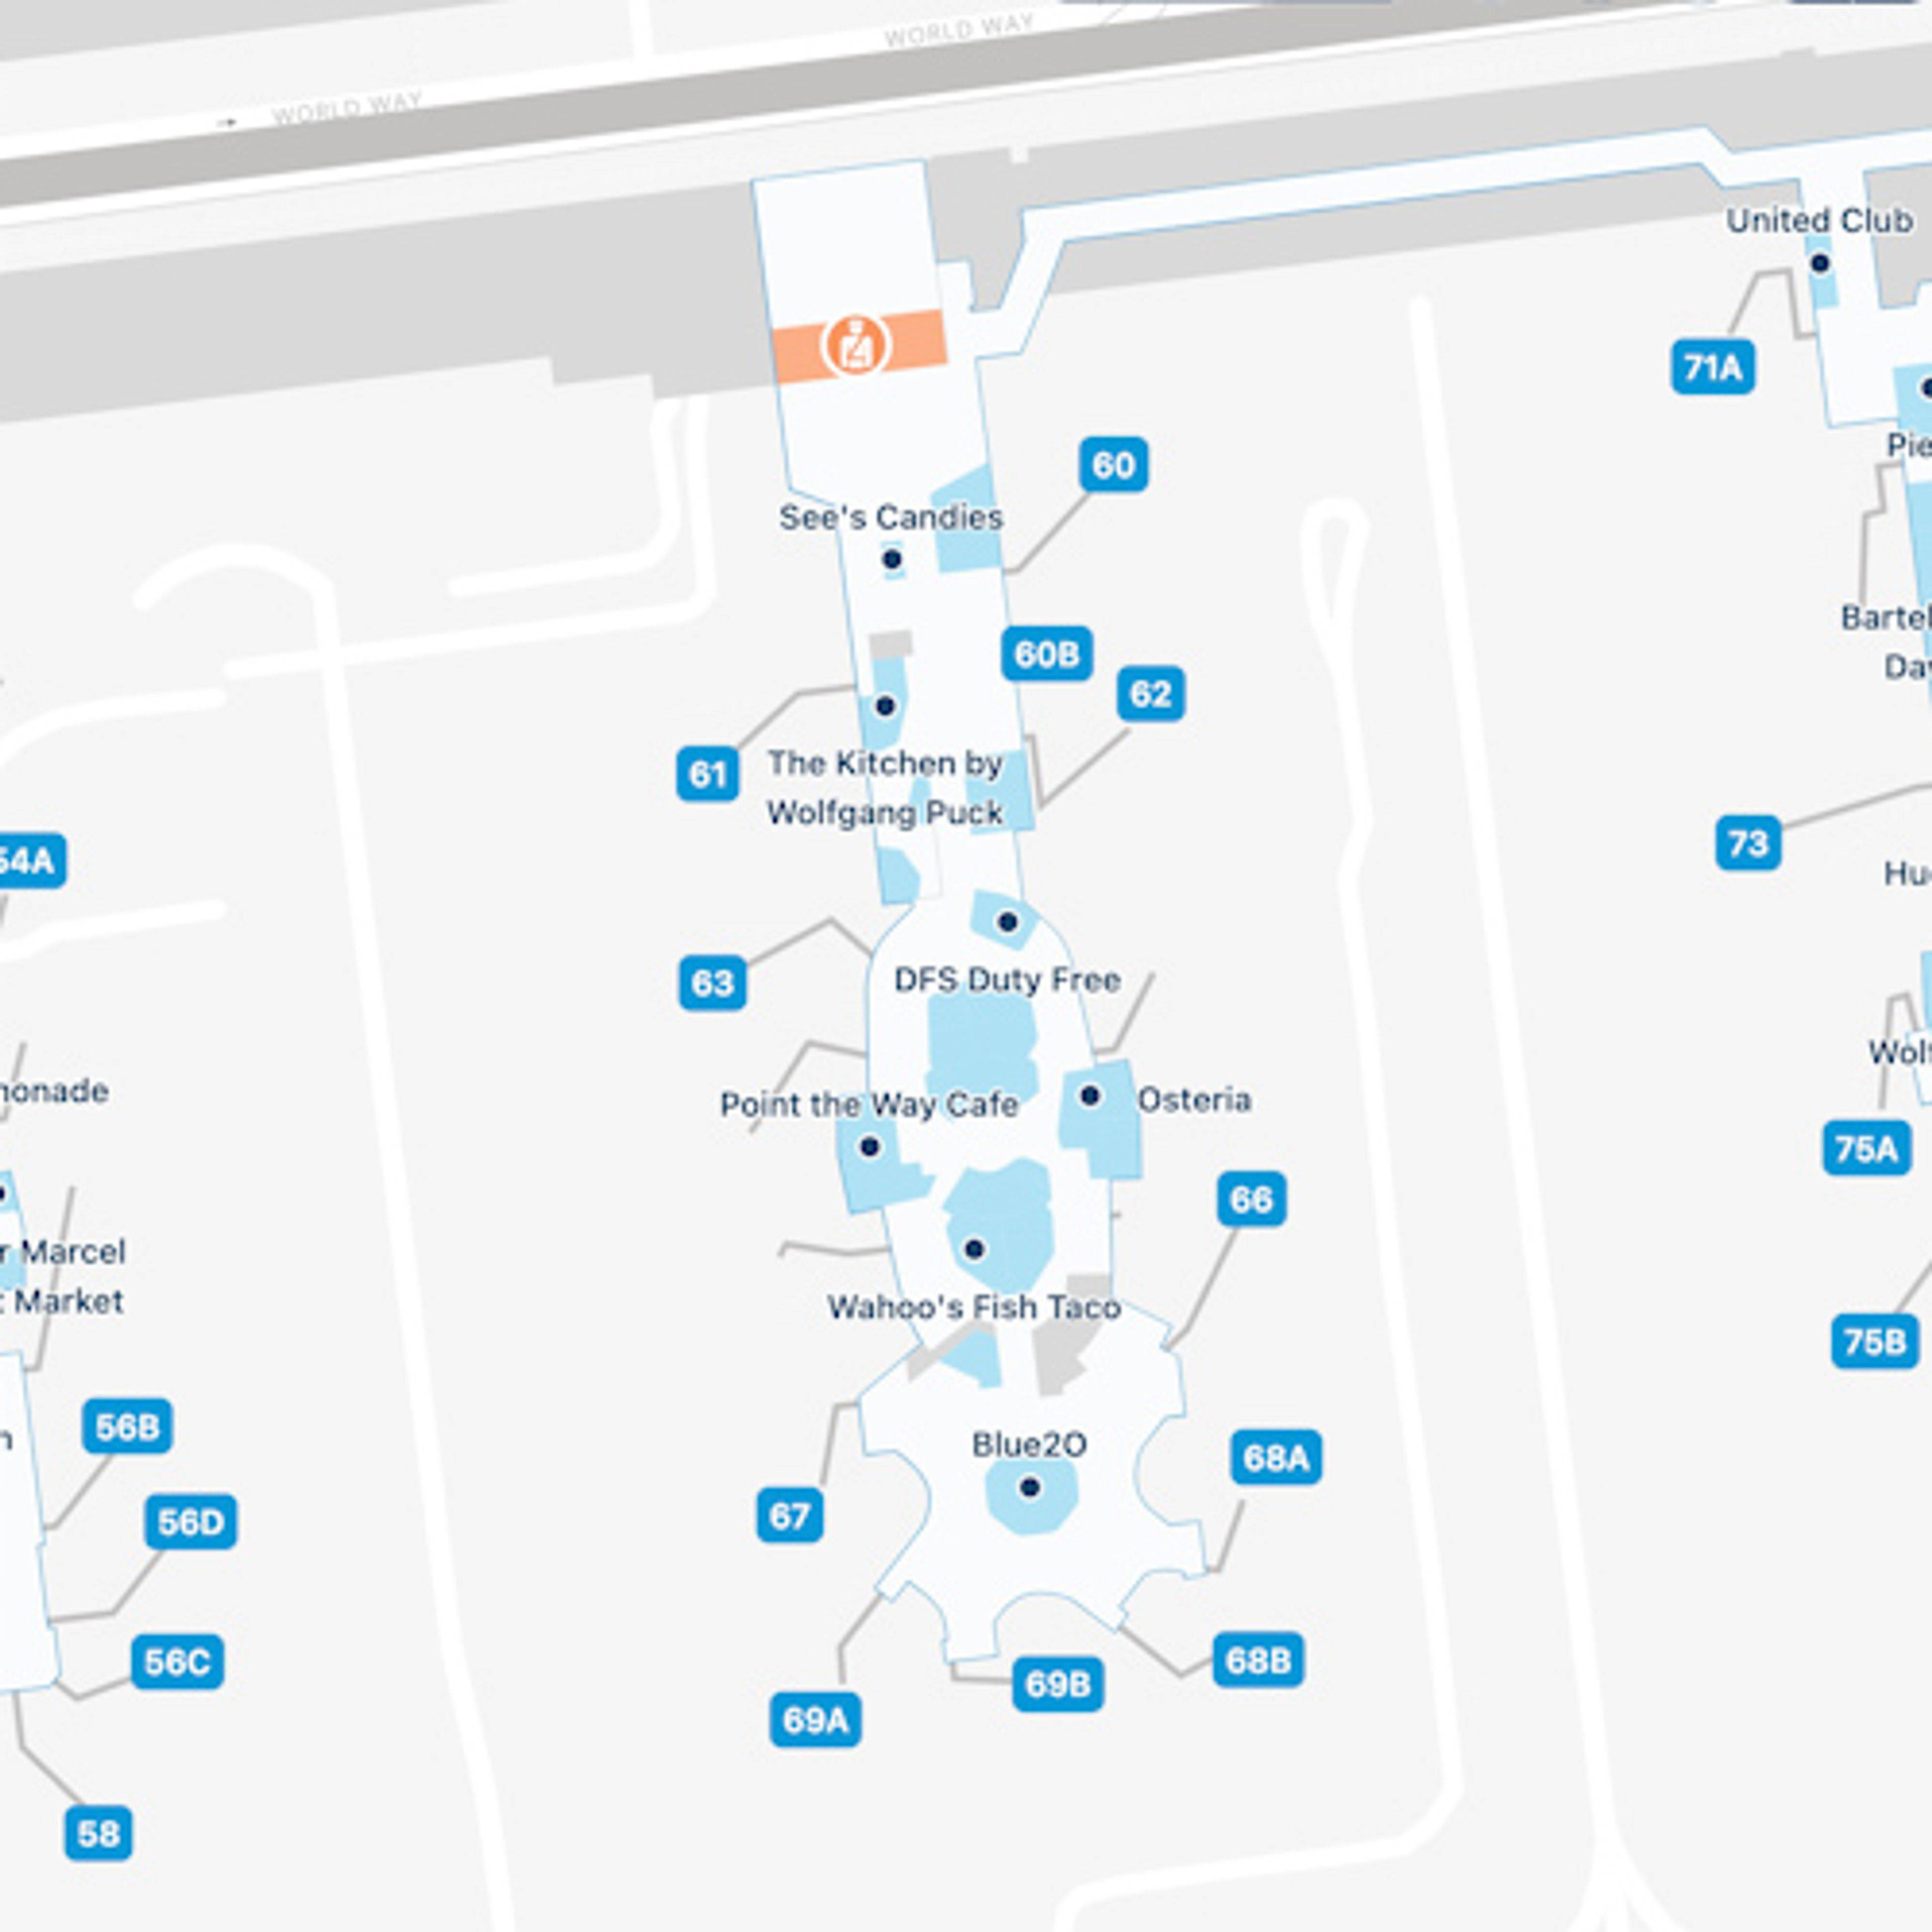 Los Angeles Airport Terminal 6 Map